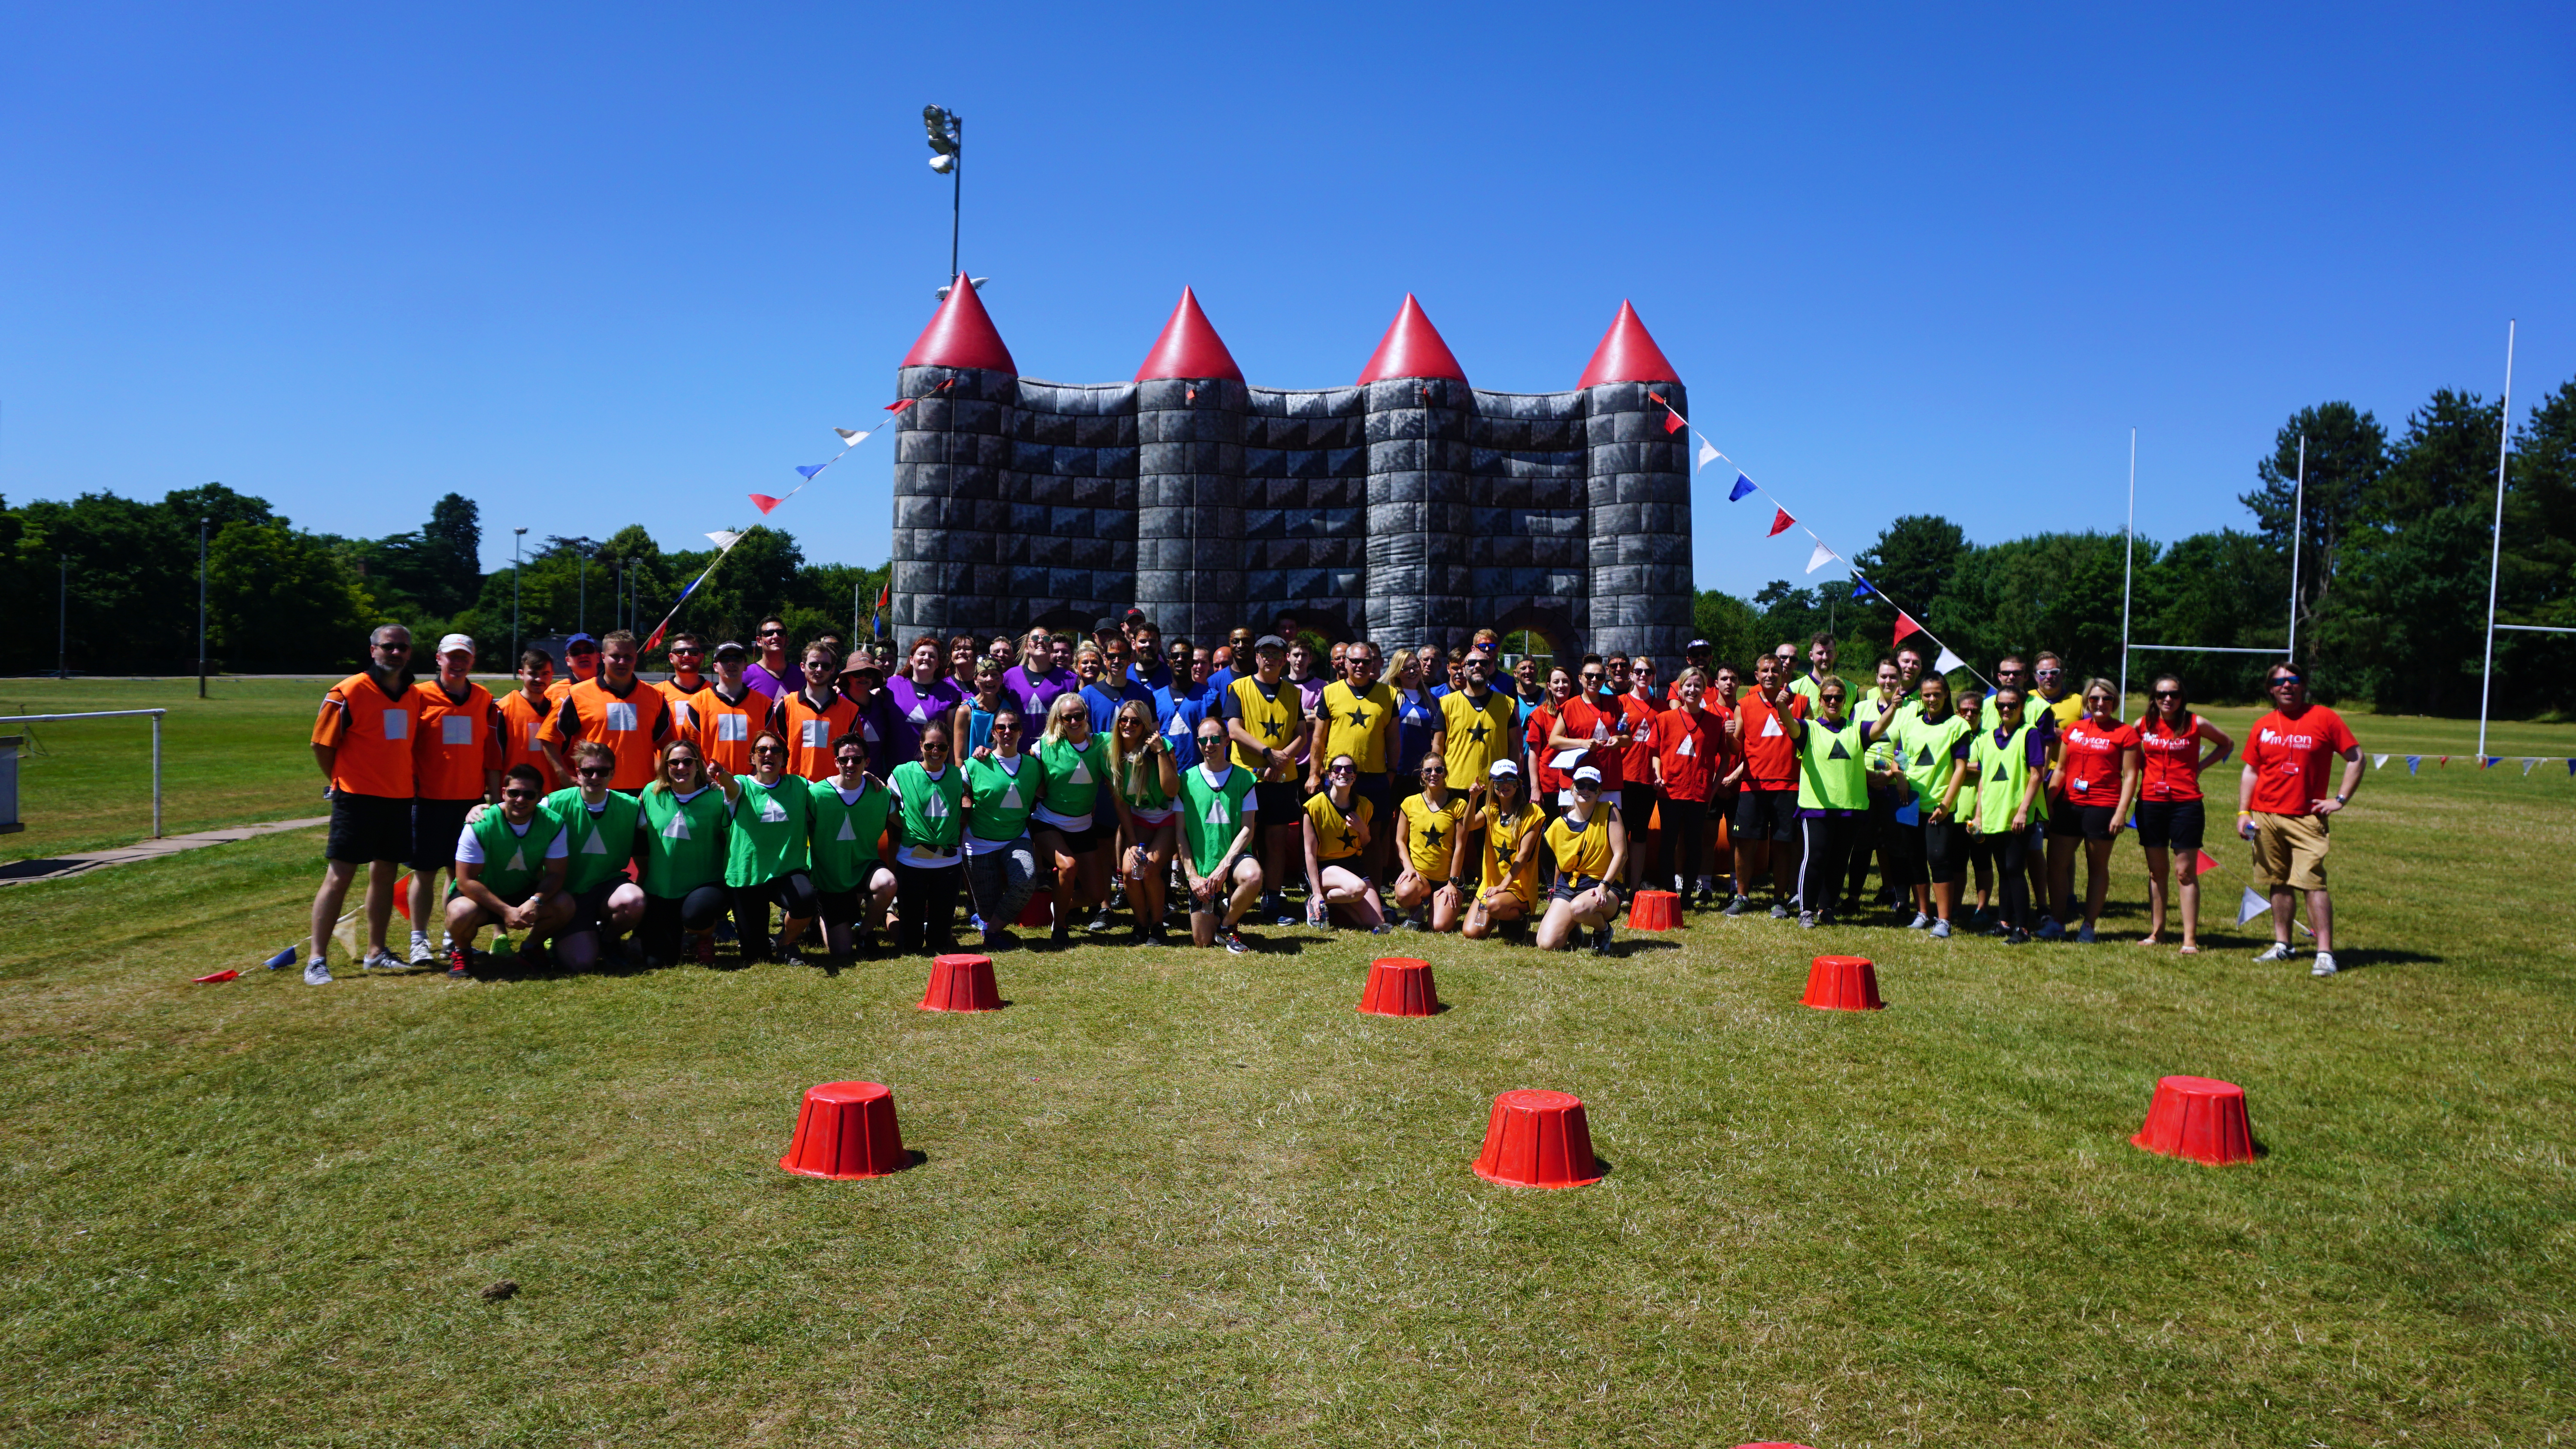 Companies invited to take on It’s a Knockout in aid of The Myton Hospices